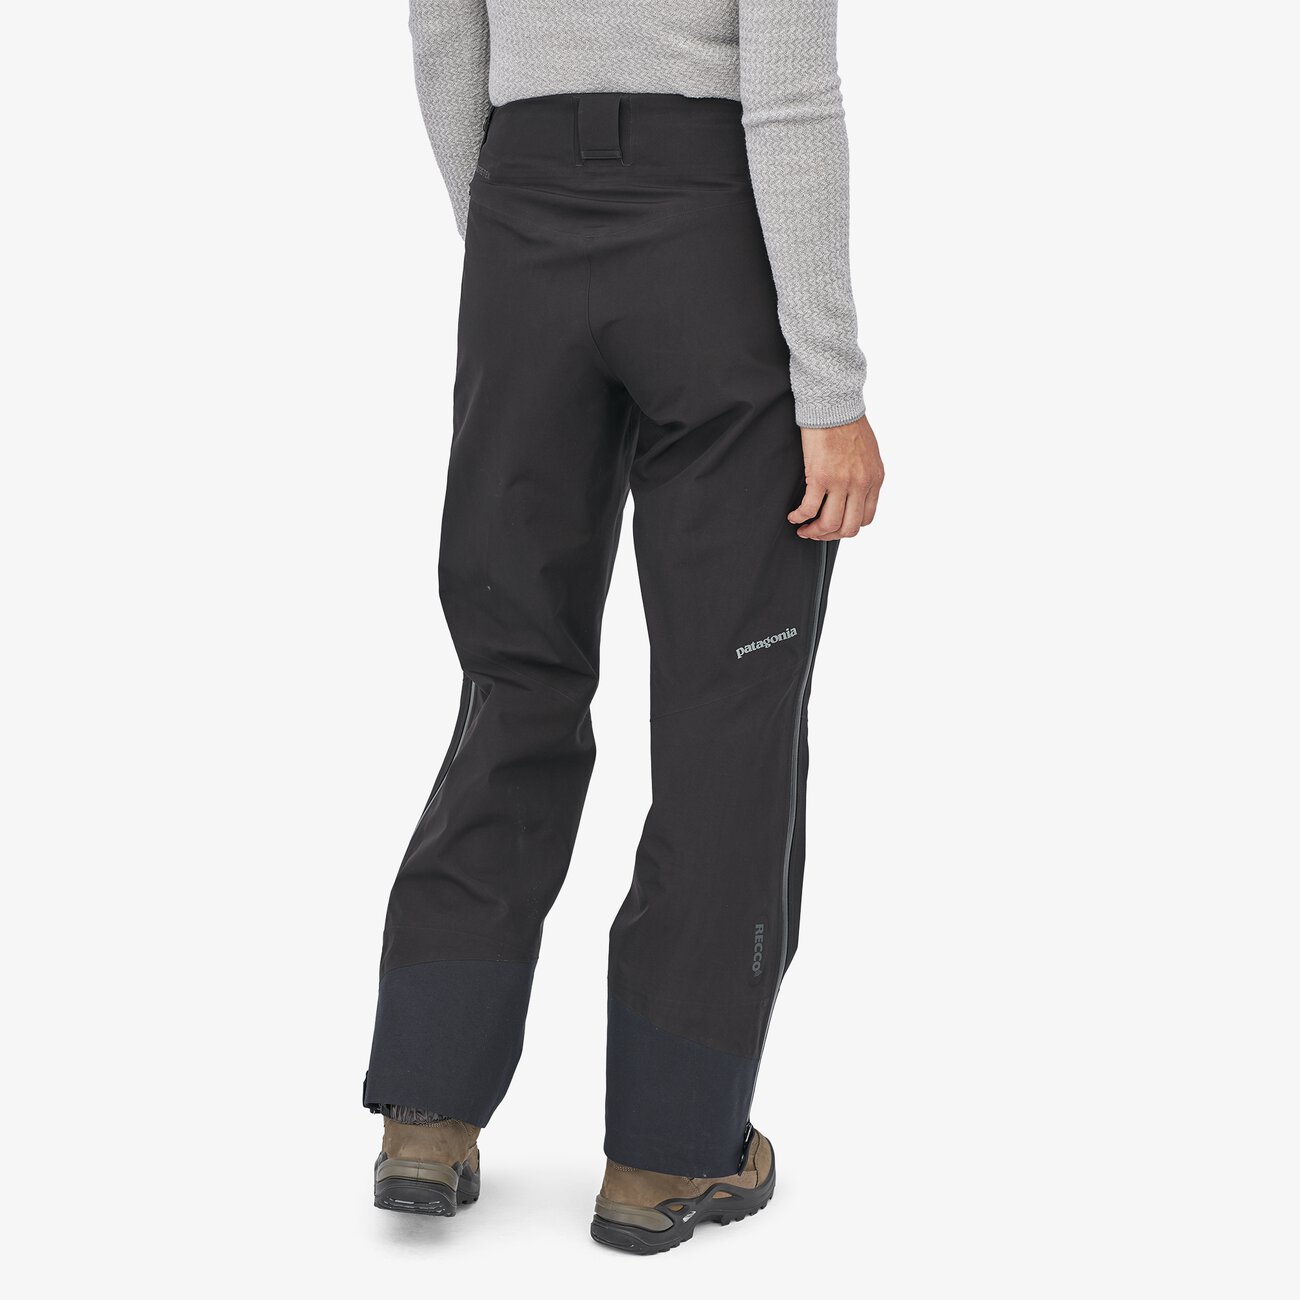 Patagonia Women's Triolet Pants for Alpine Climbing